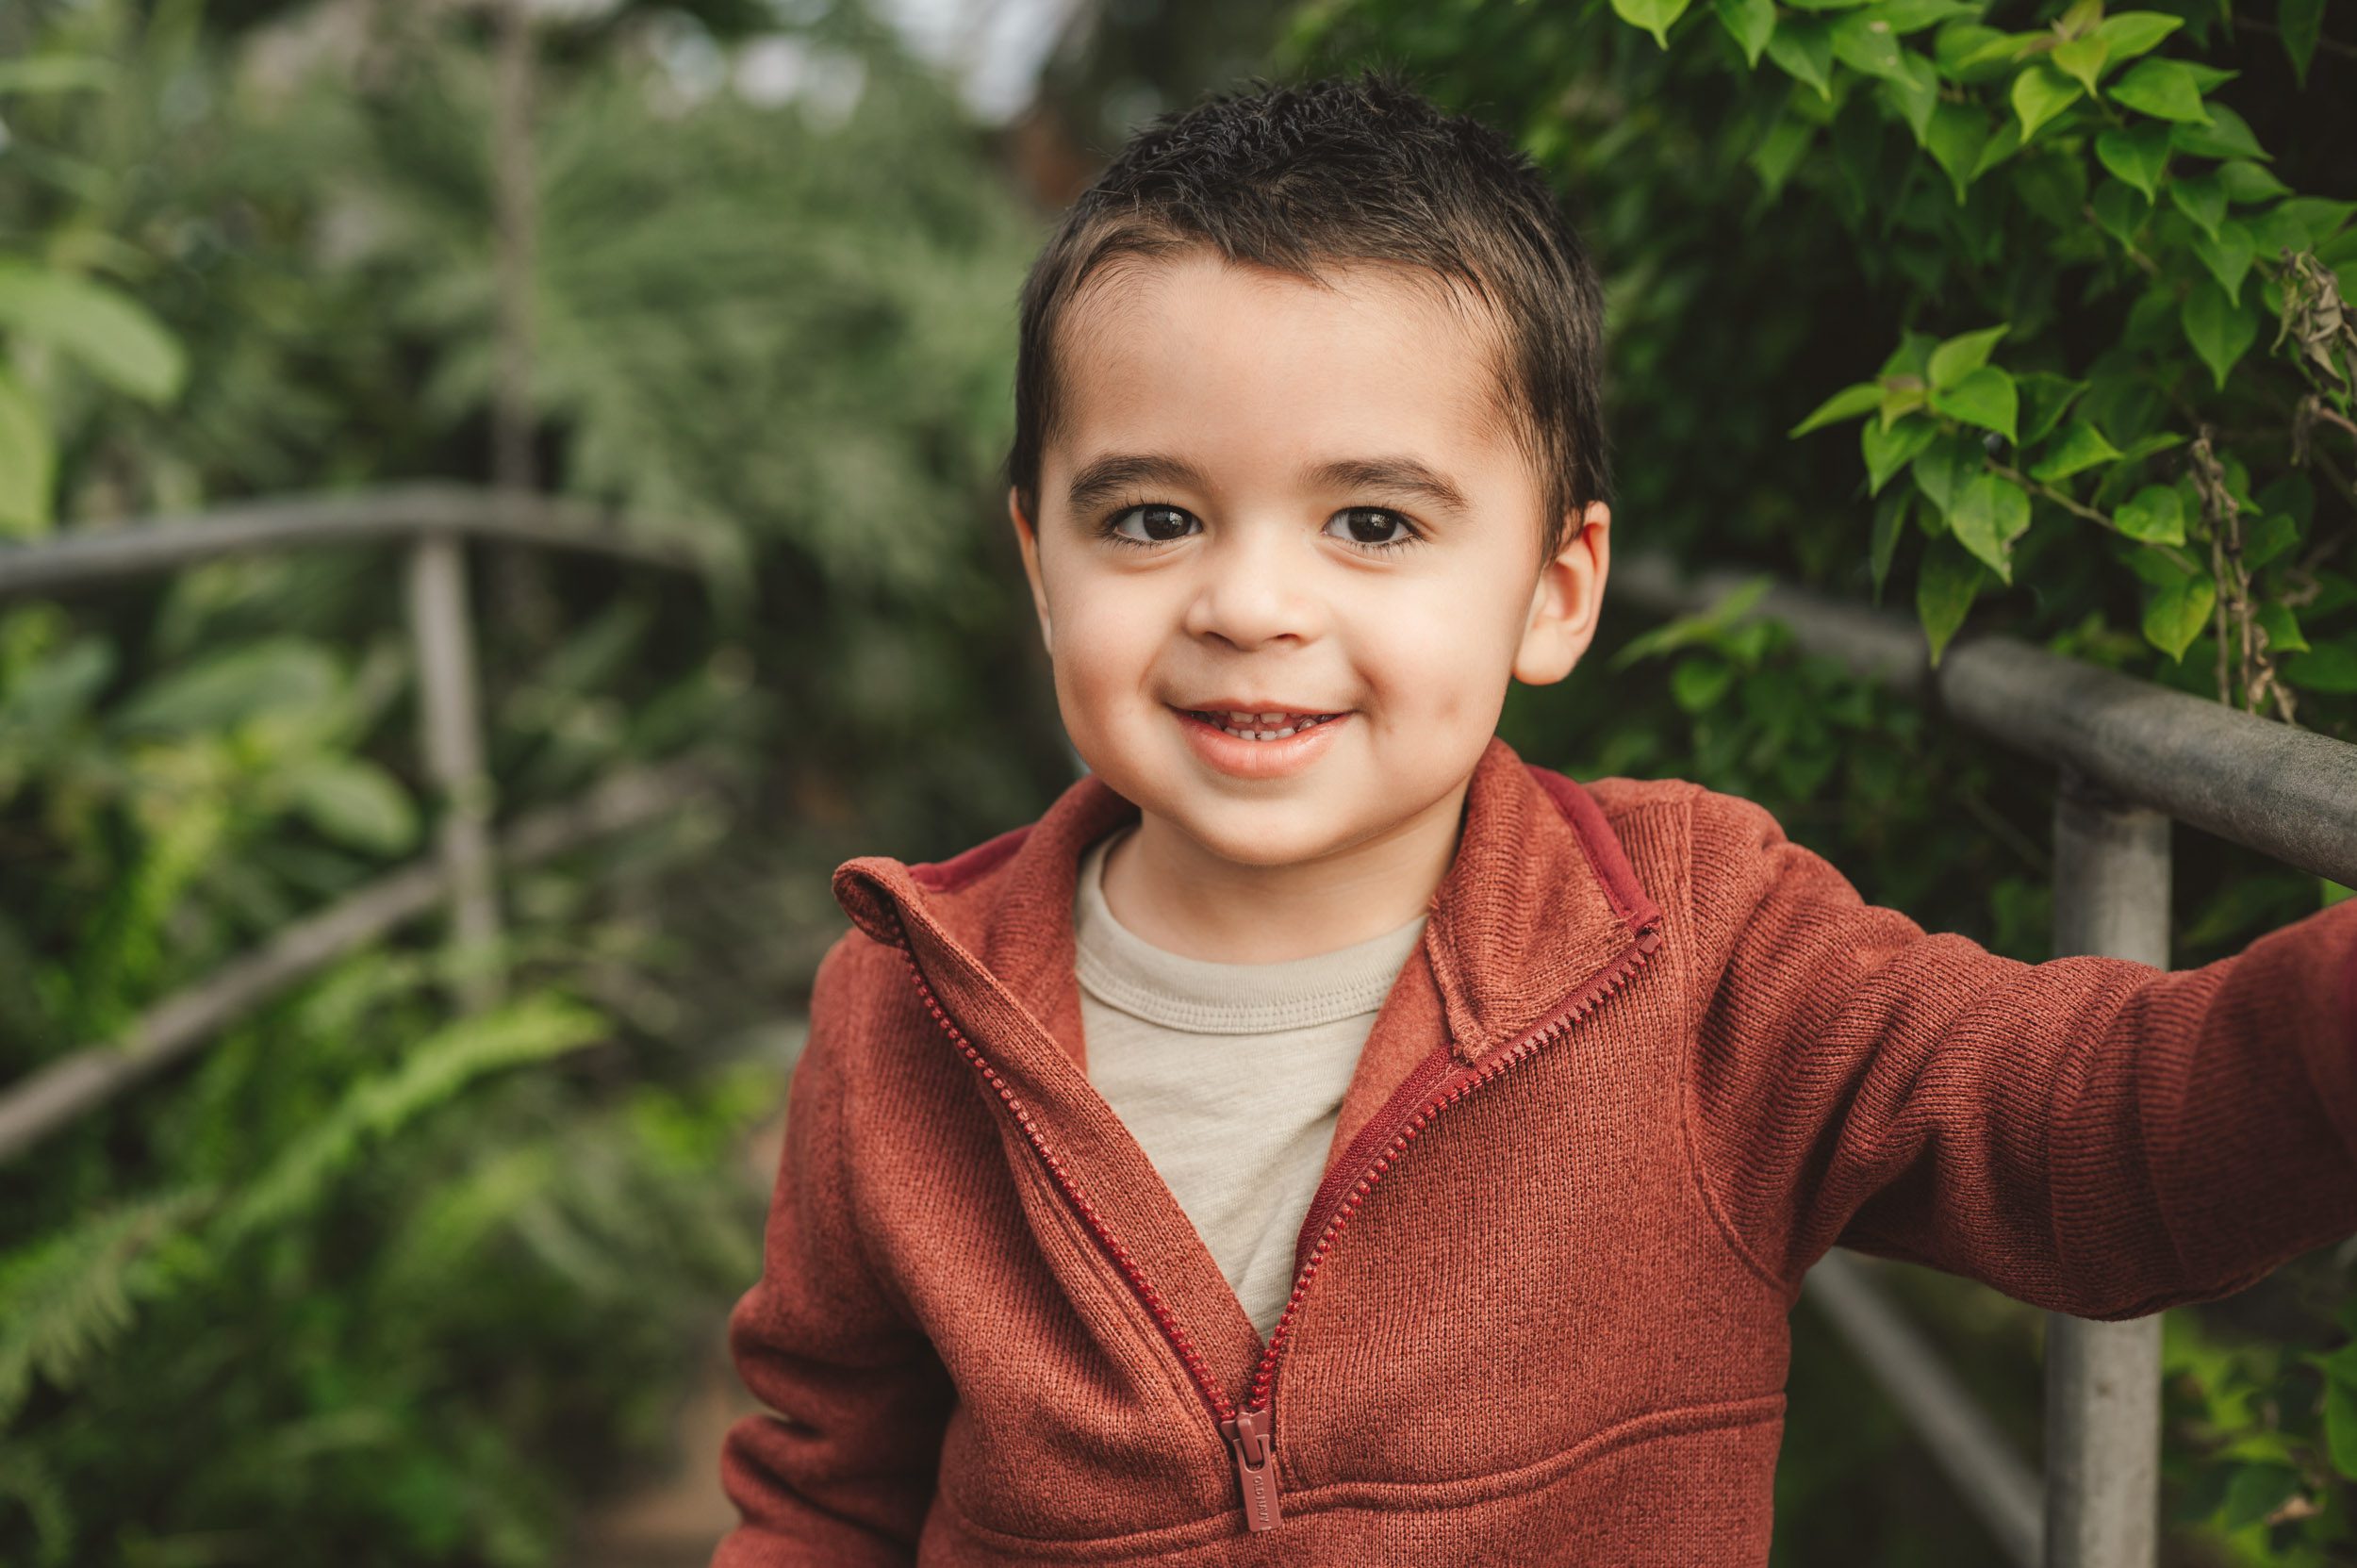 a young boy standing in a greenhouse holding onto a metal railing and smiling directly at the camera during a family maternity photoshoot